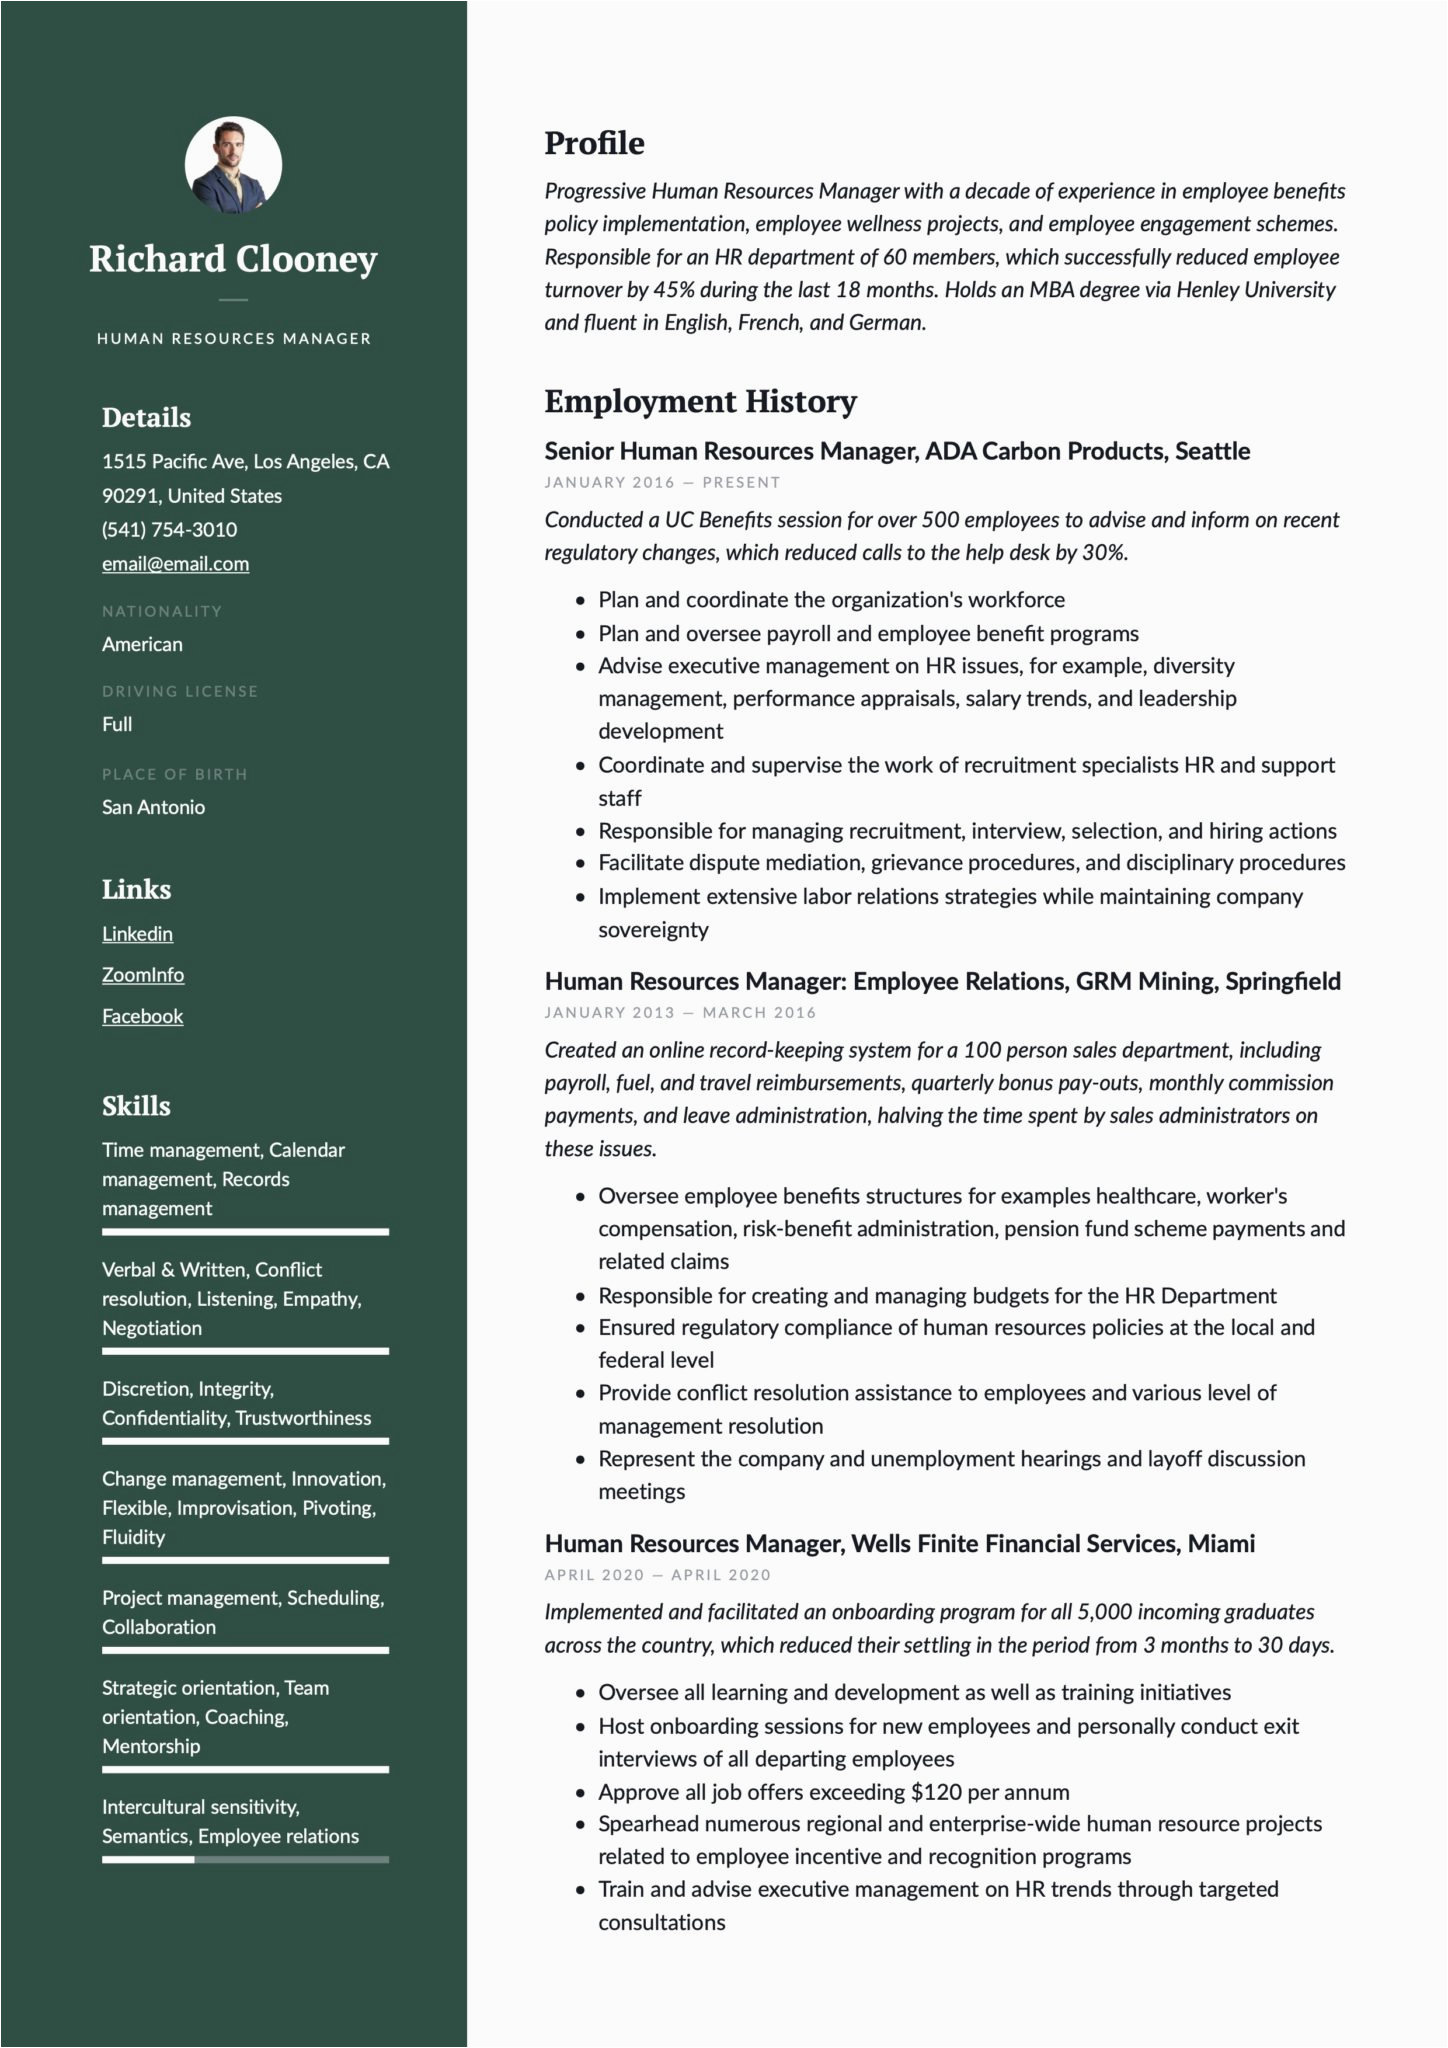 Sample Resume Of An Human Resource Manager 17 Human Resources Manager Resumes & Guide